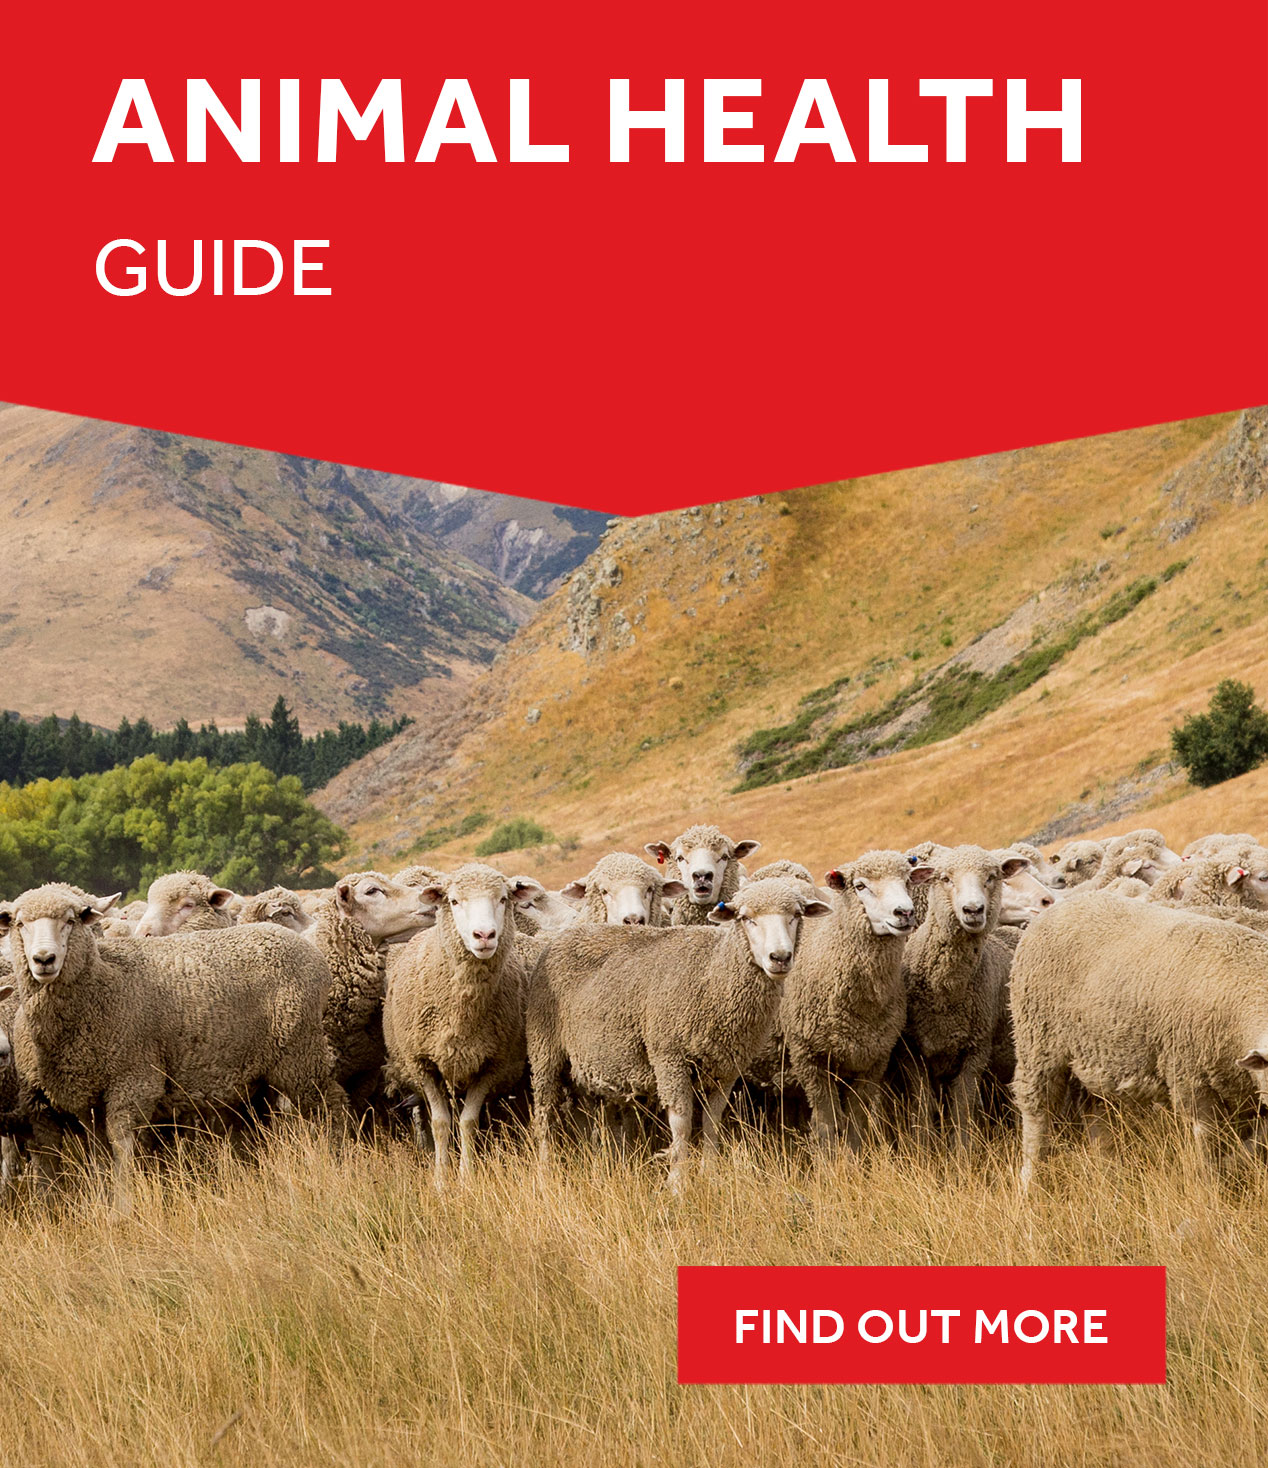 Discover the Ruralco Animal Health Guide